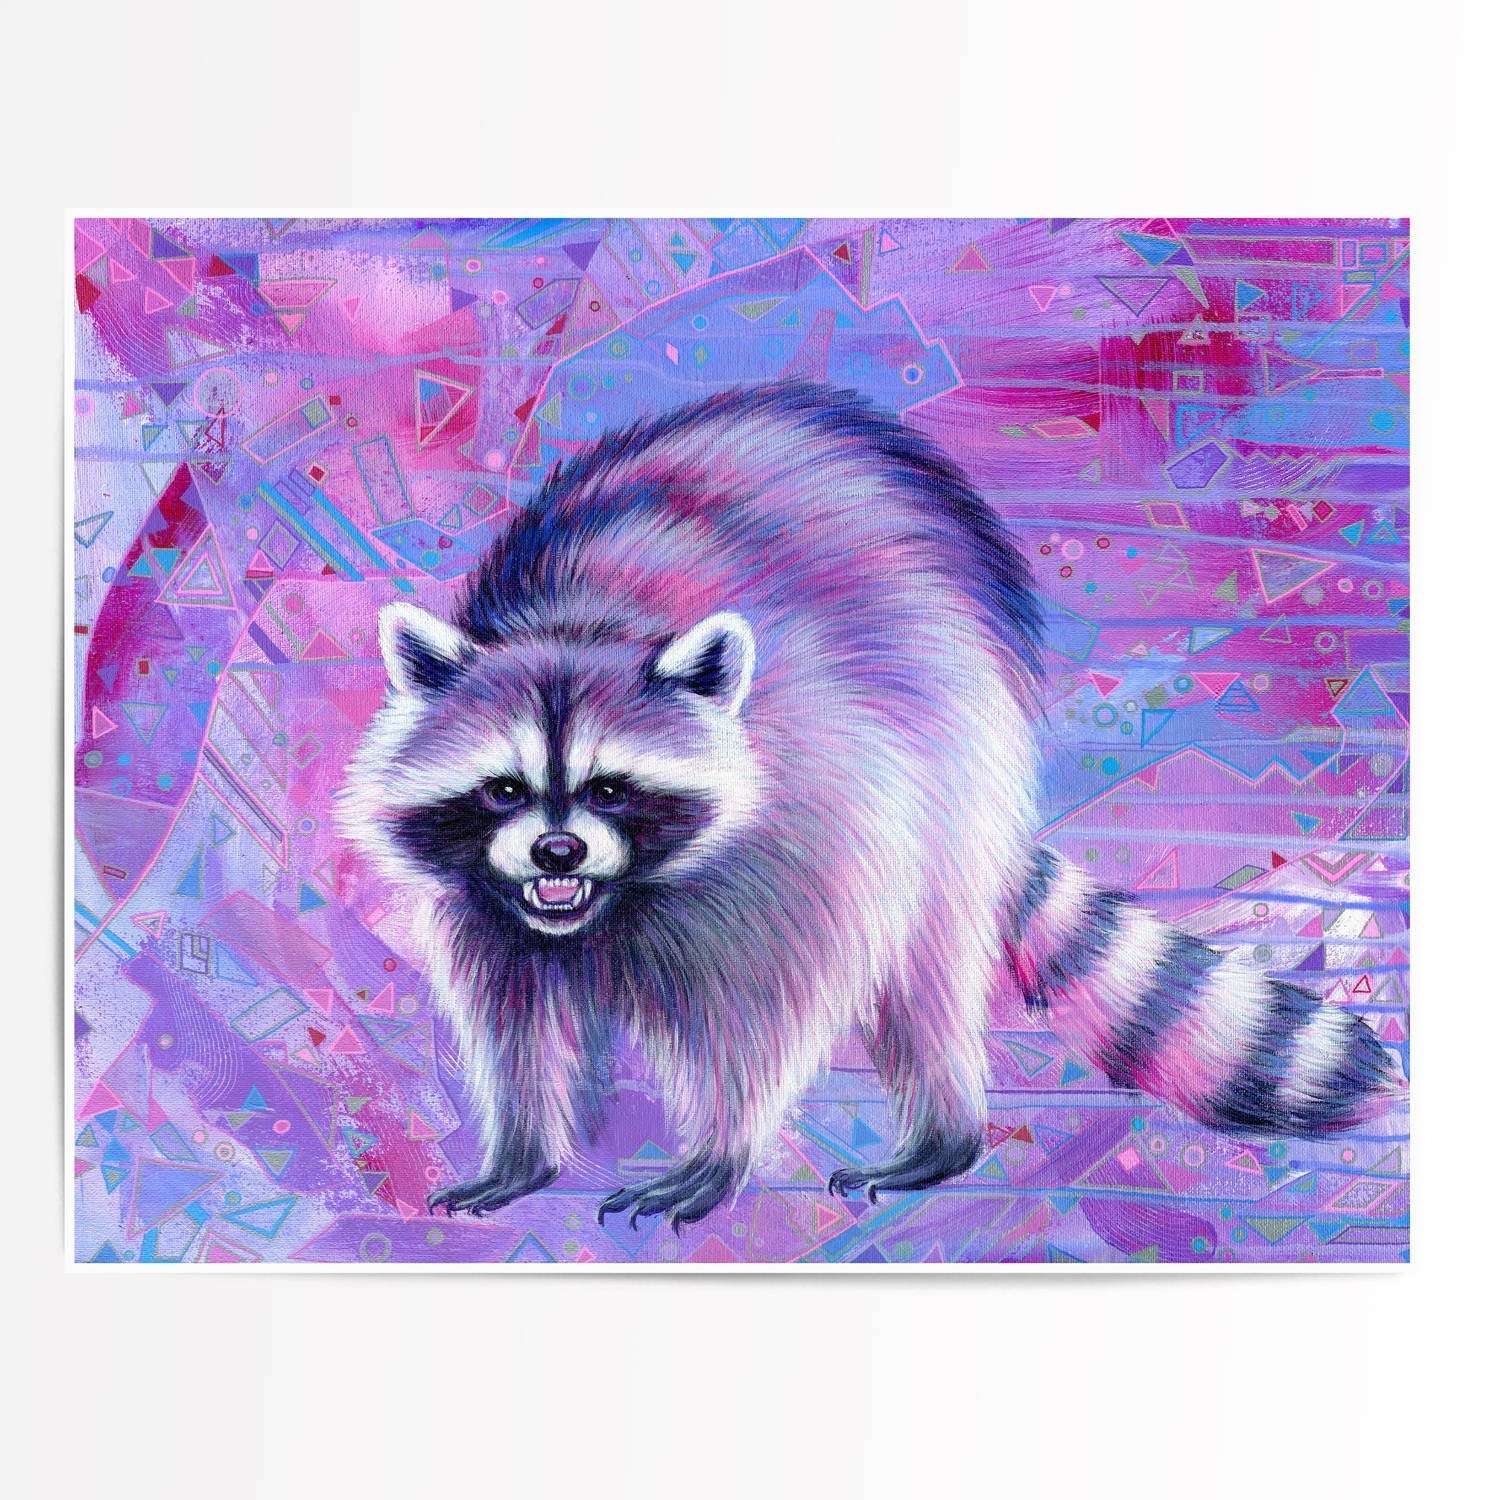 Illustration of a raccoon from the Trash Animals - Fine Art Print Bundle on a vibrant, geometric-patterned purple background.